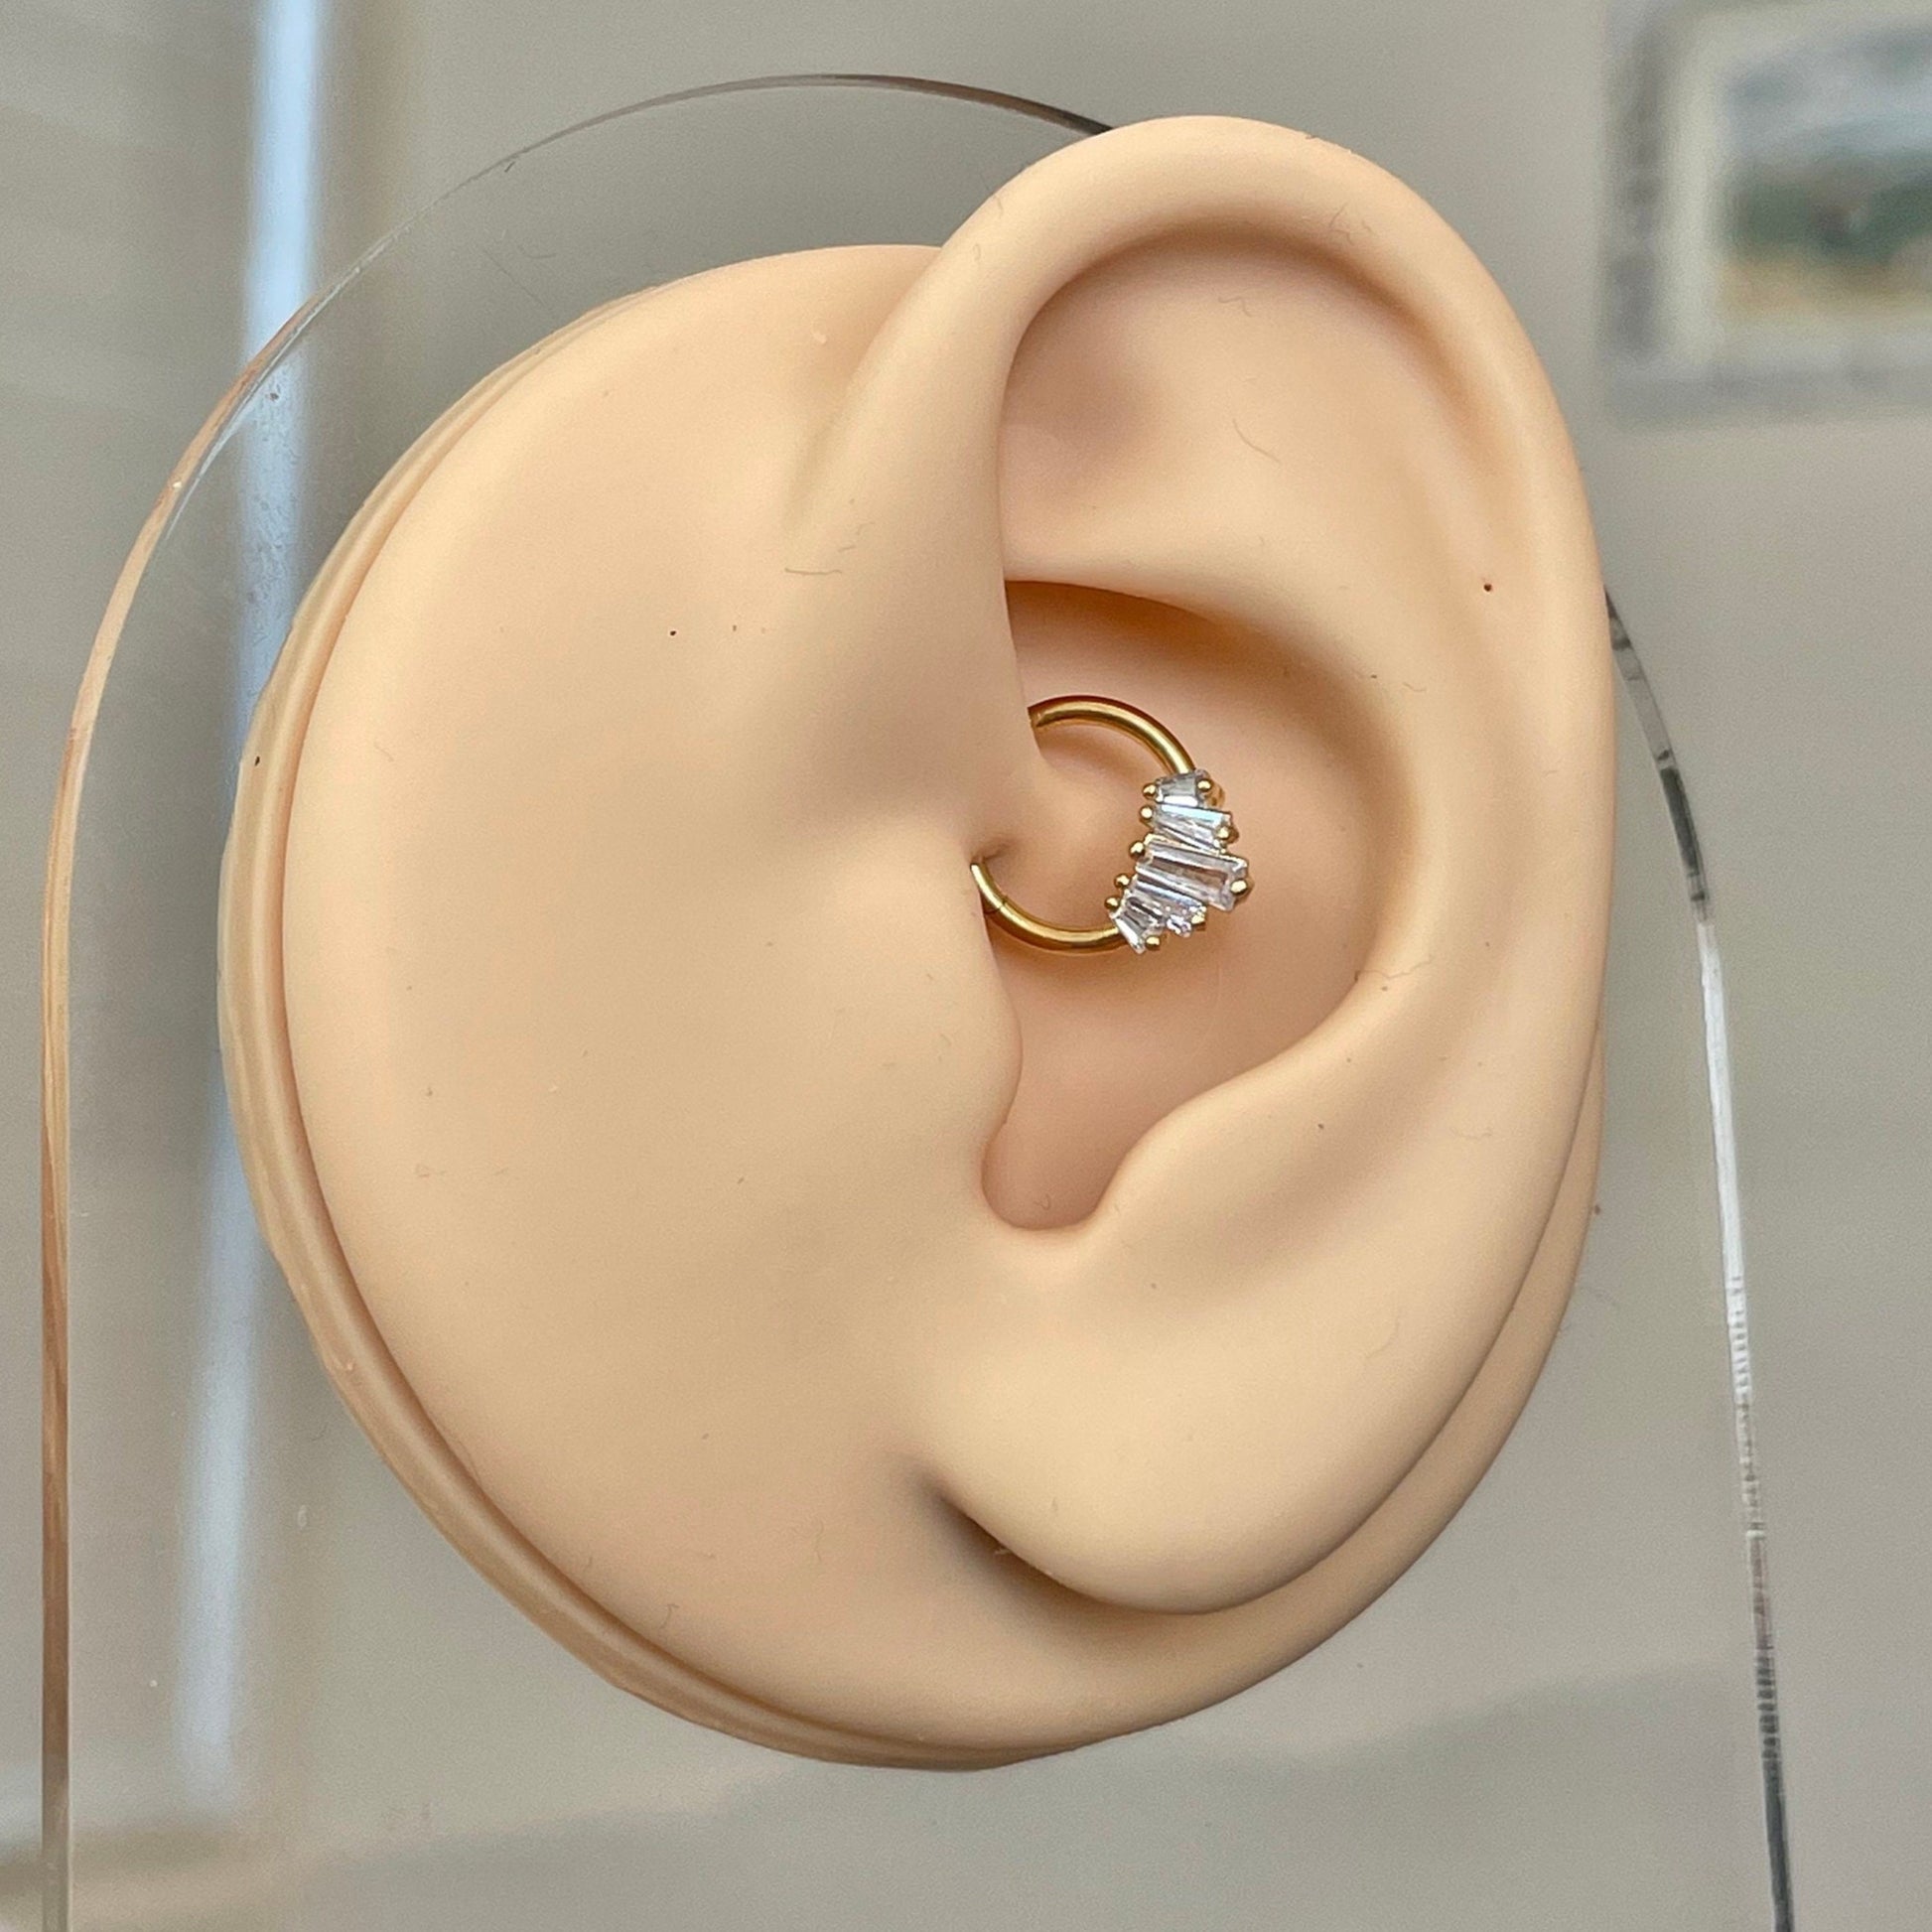 Gold CZ Daith Earring (16G | 8mm or 10mm | Surgical Steel | Gold, Black, or Silver)Cute Gold Daith Earring (16G | 8mm or 10mm | Surgical Steel | Gold, Black or Silver)